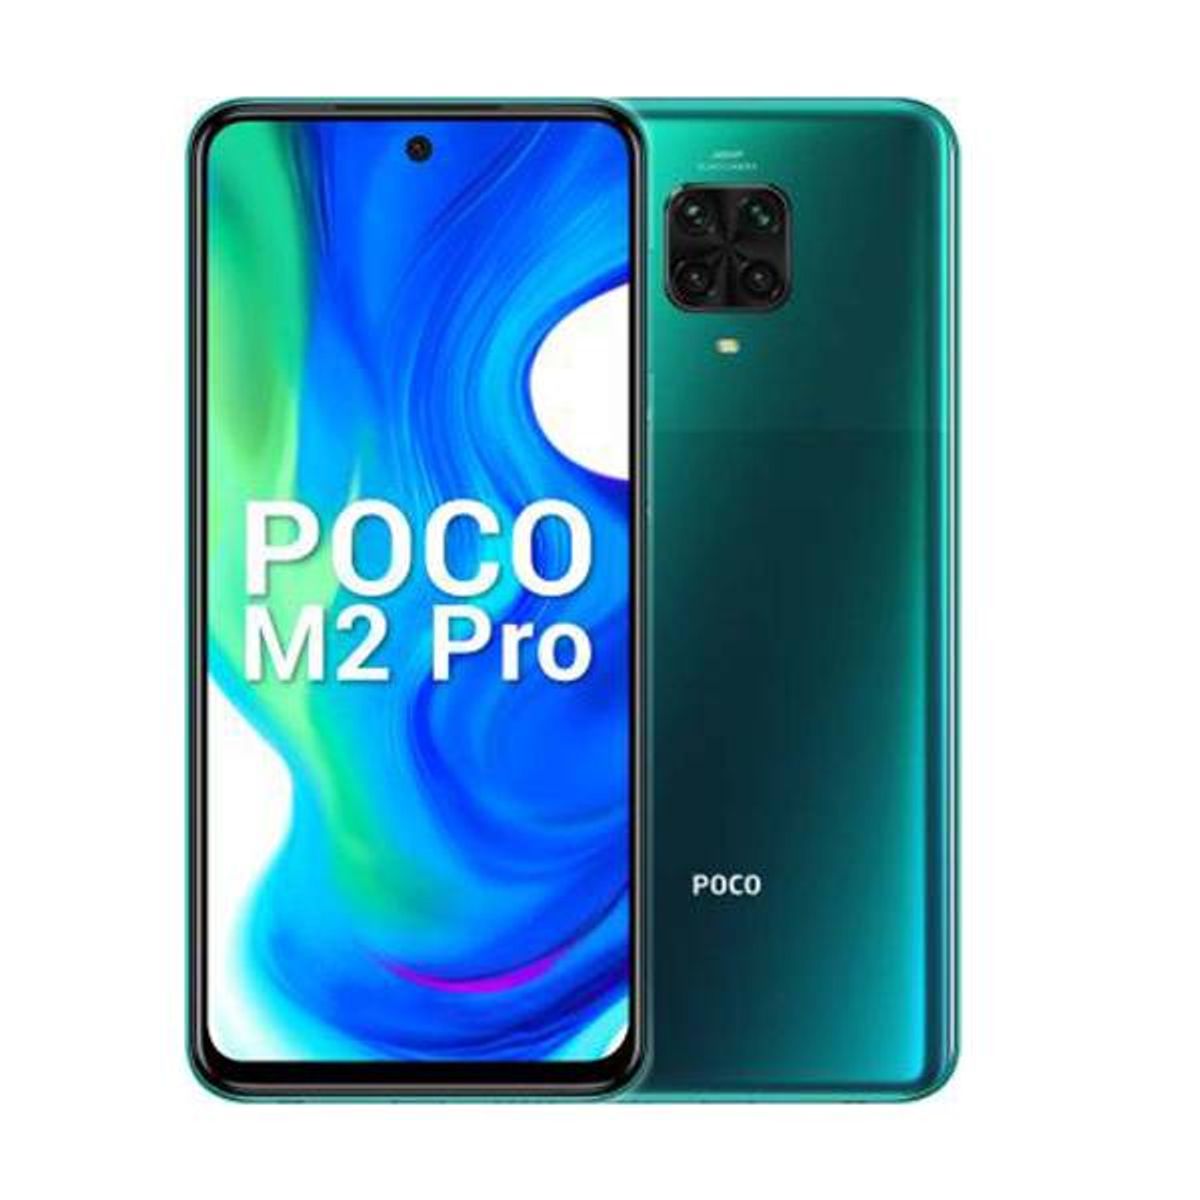 How to Unlock Poco M2 Mobile Phone? Forgot Password or Pattern